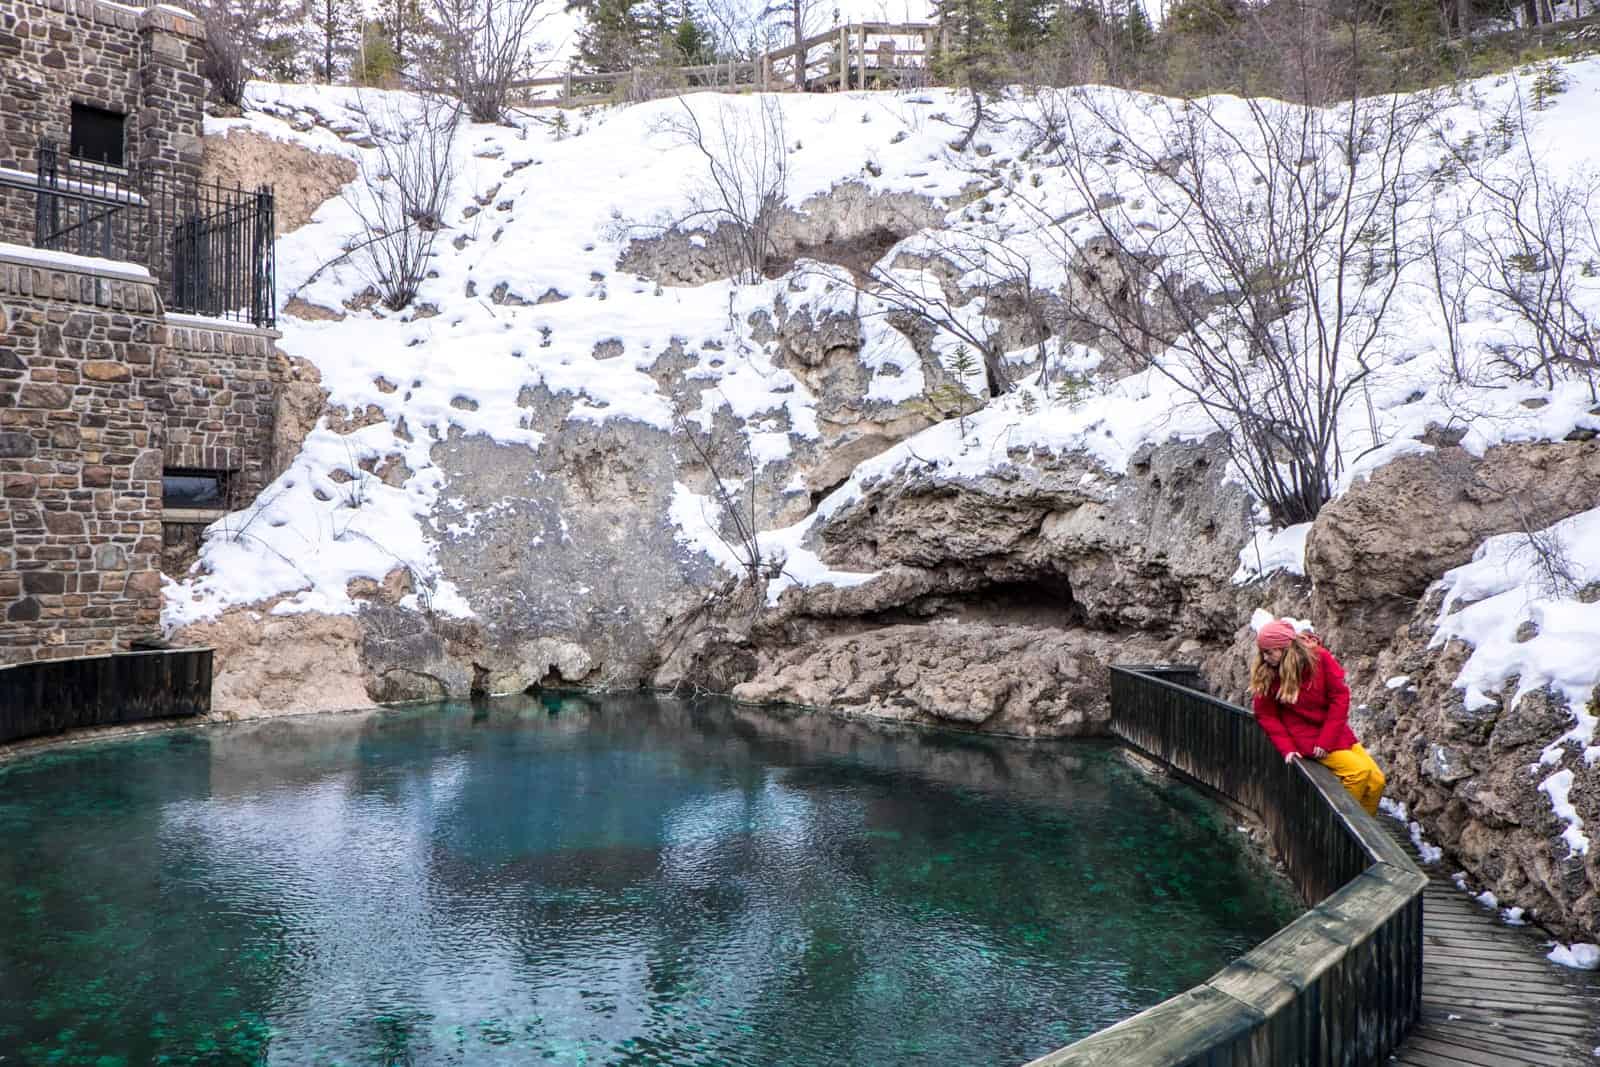 One of the many hot springs to visit in Banff in winter time